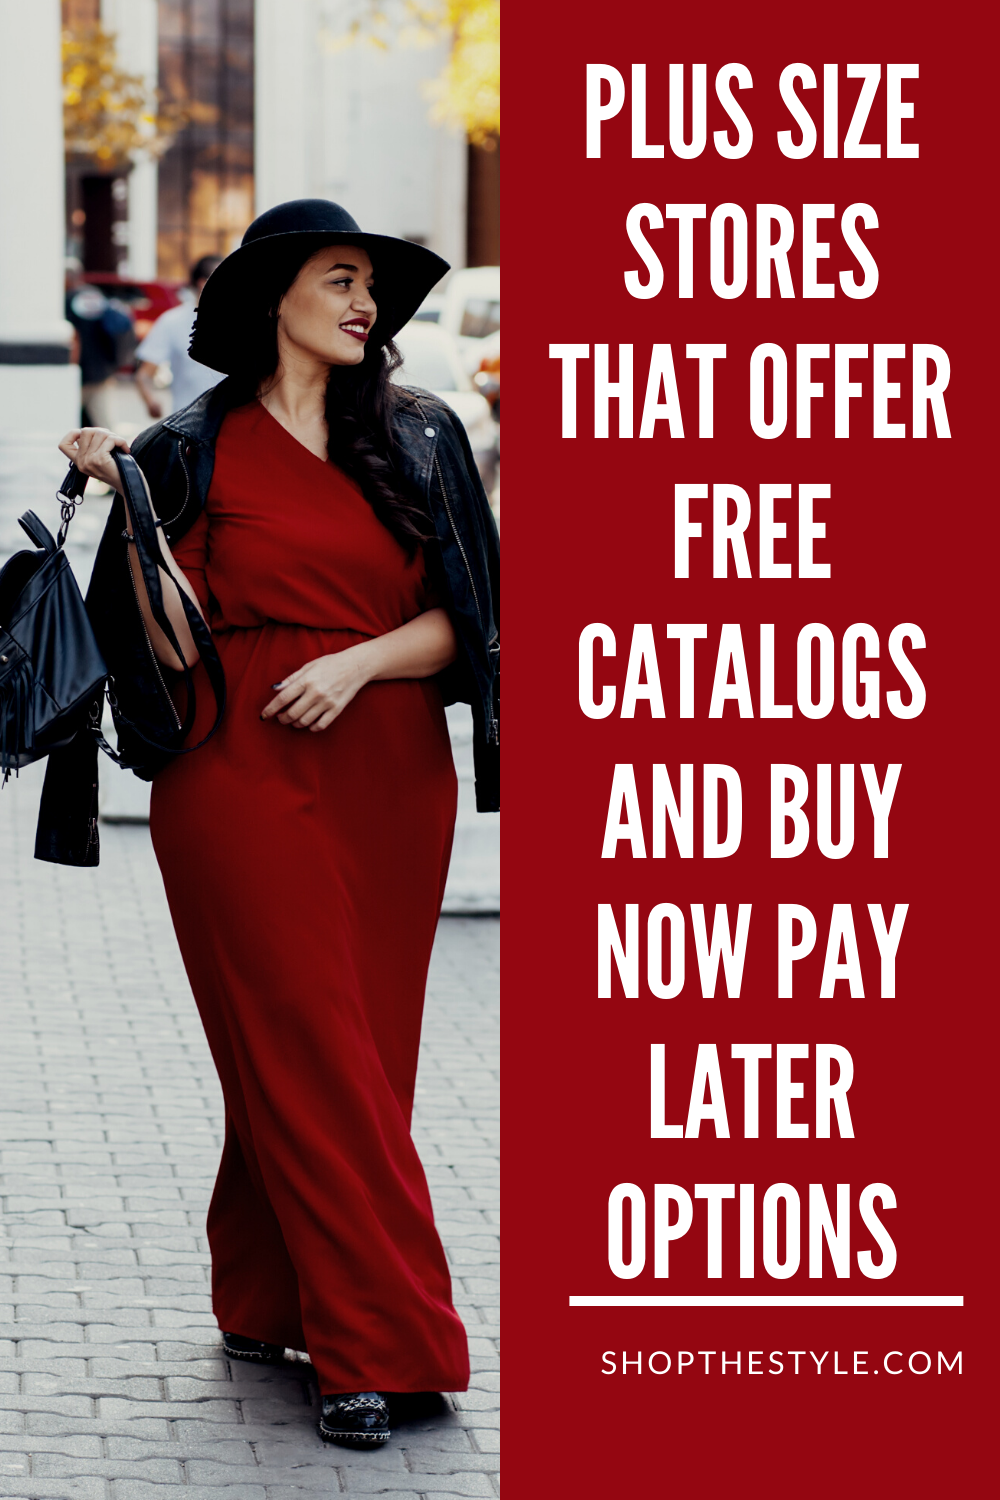 Plus Size Stores That Offer Free Catalogs And Buy Now Pay Later Options